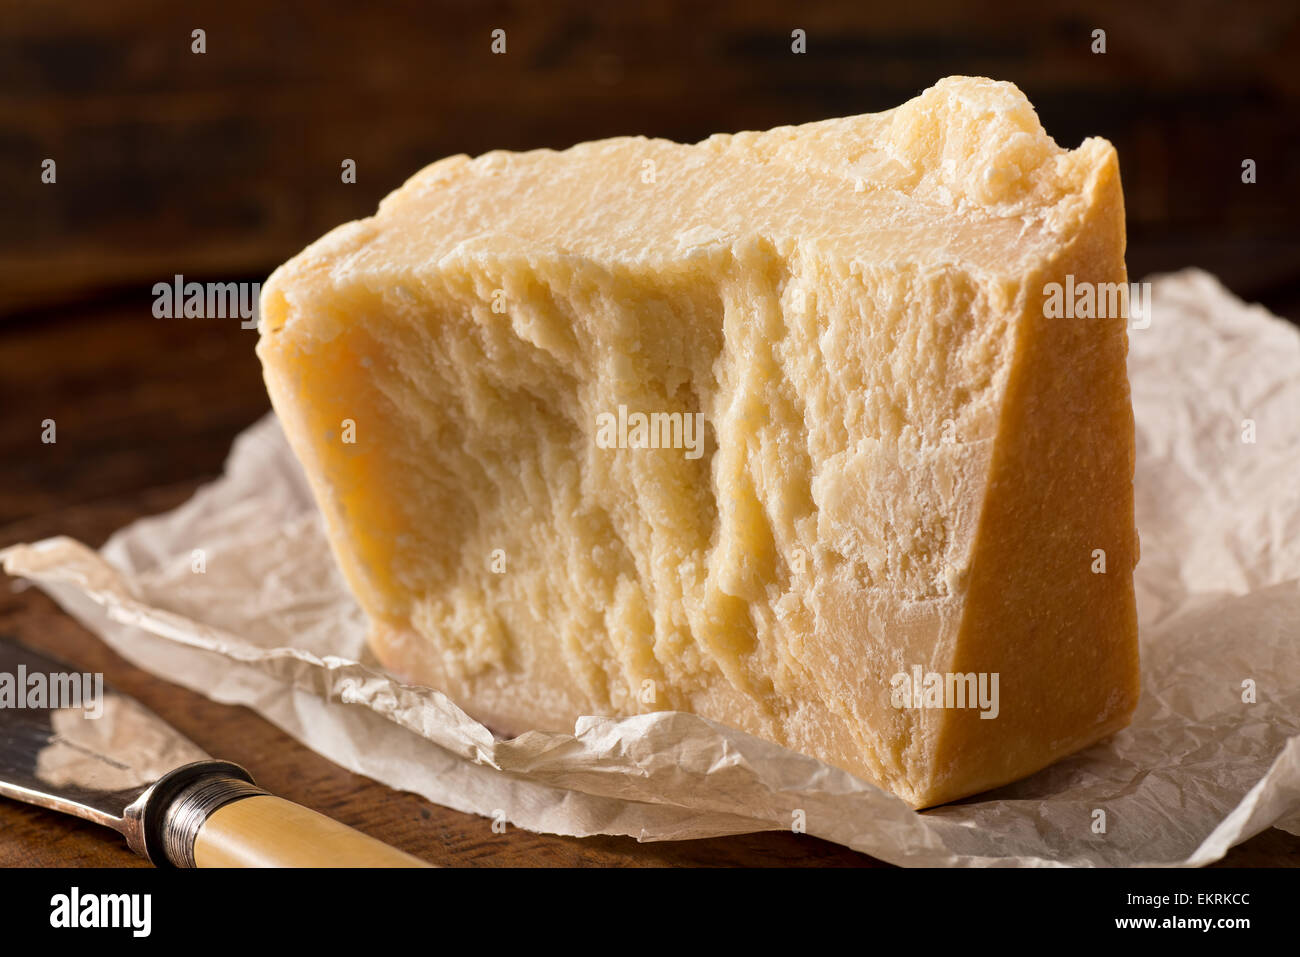 An aged authentic parmigiano reggiano parmesan cheese with wrapper and cheese knife. Stock Photo